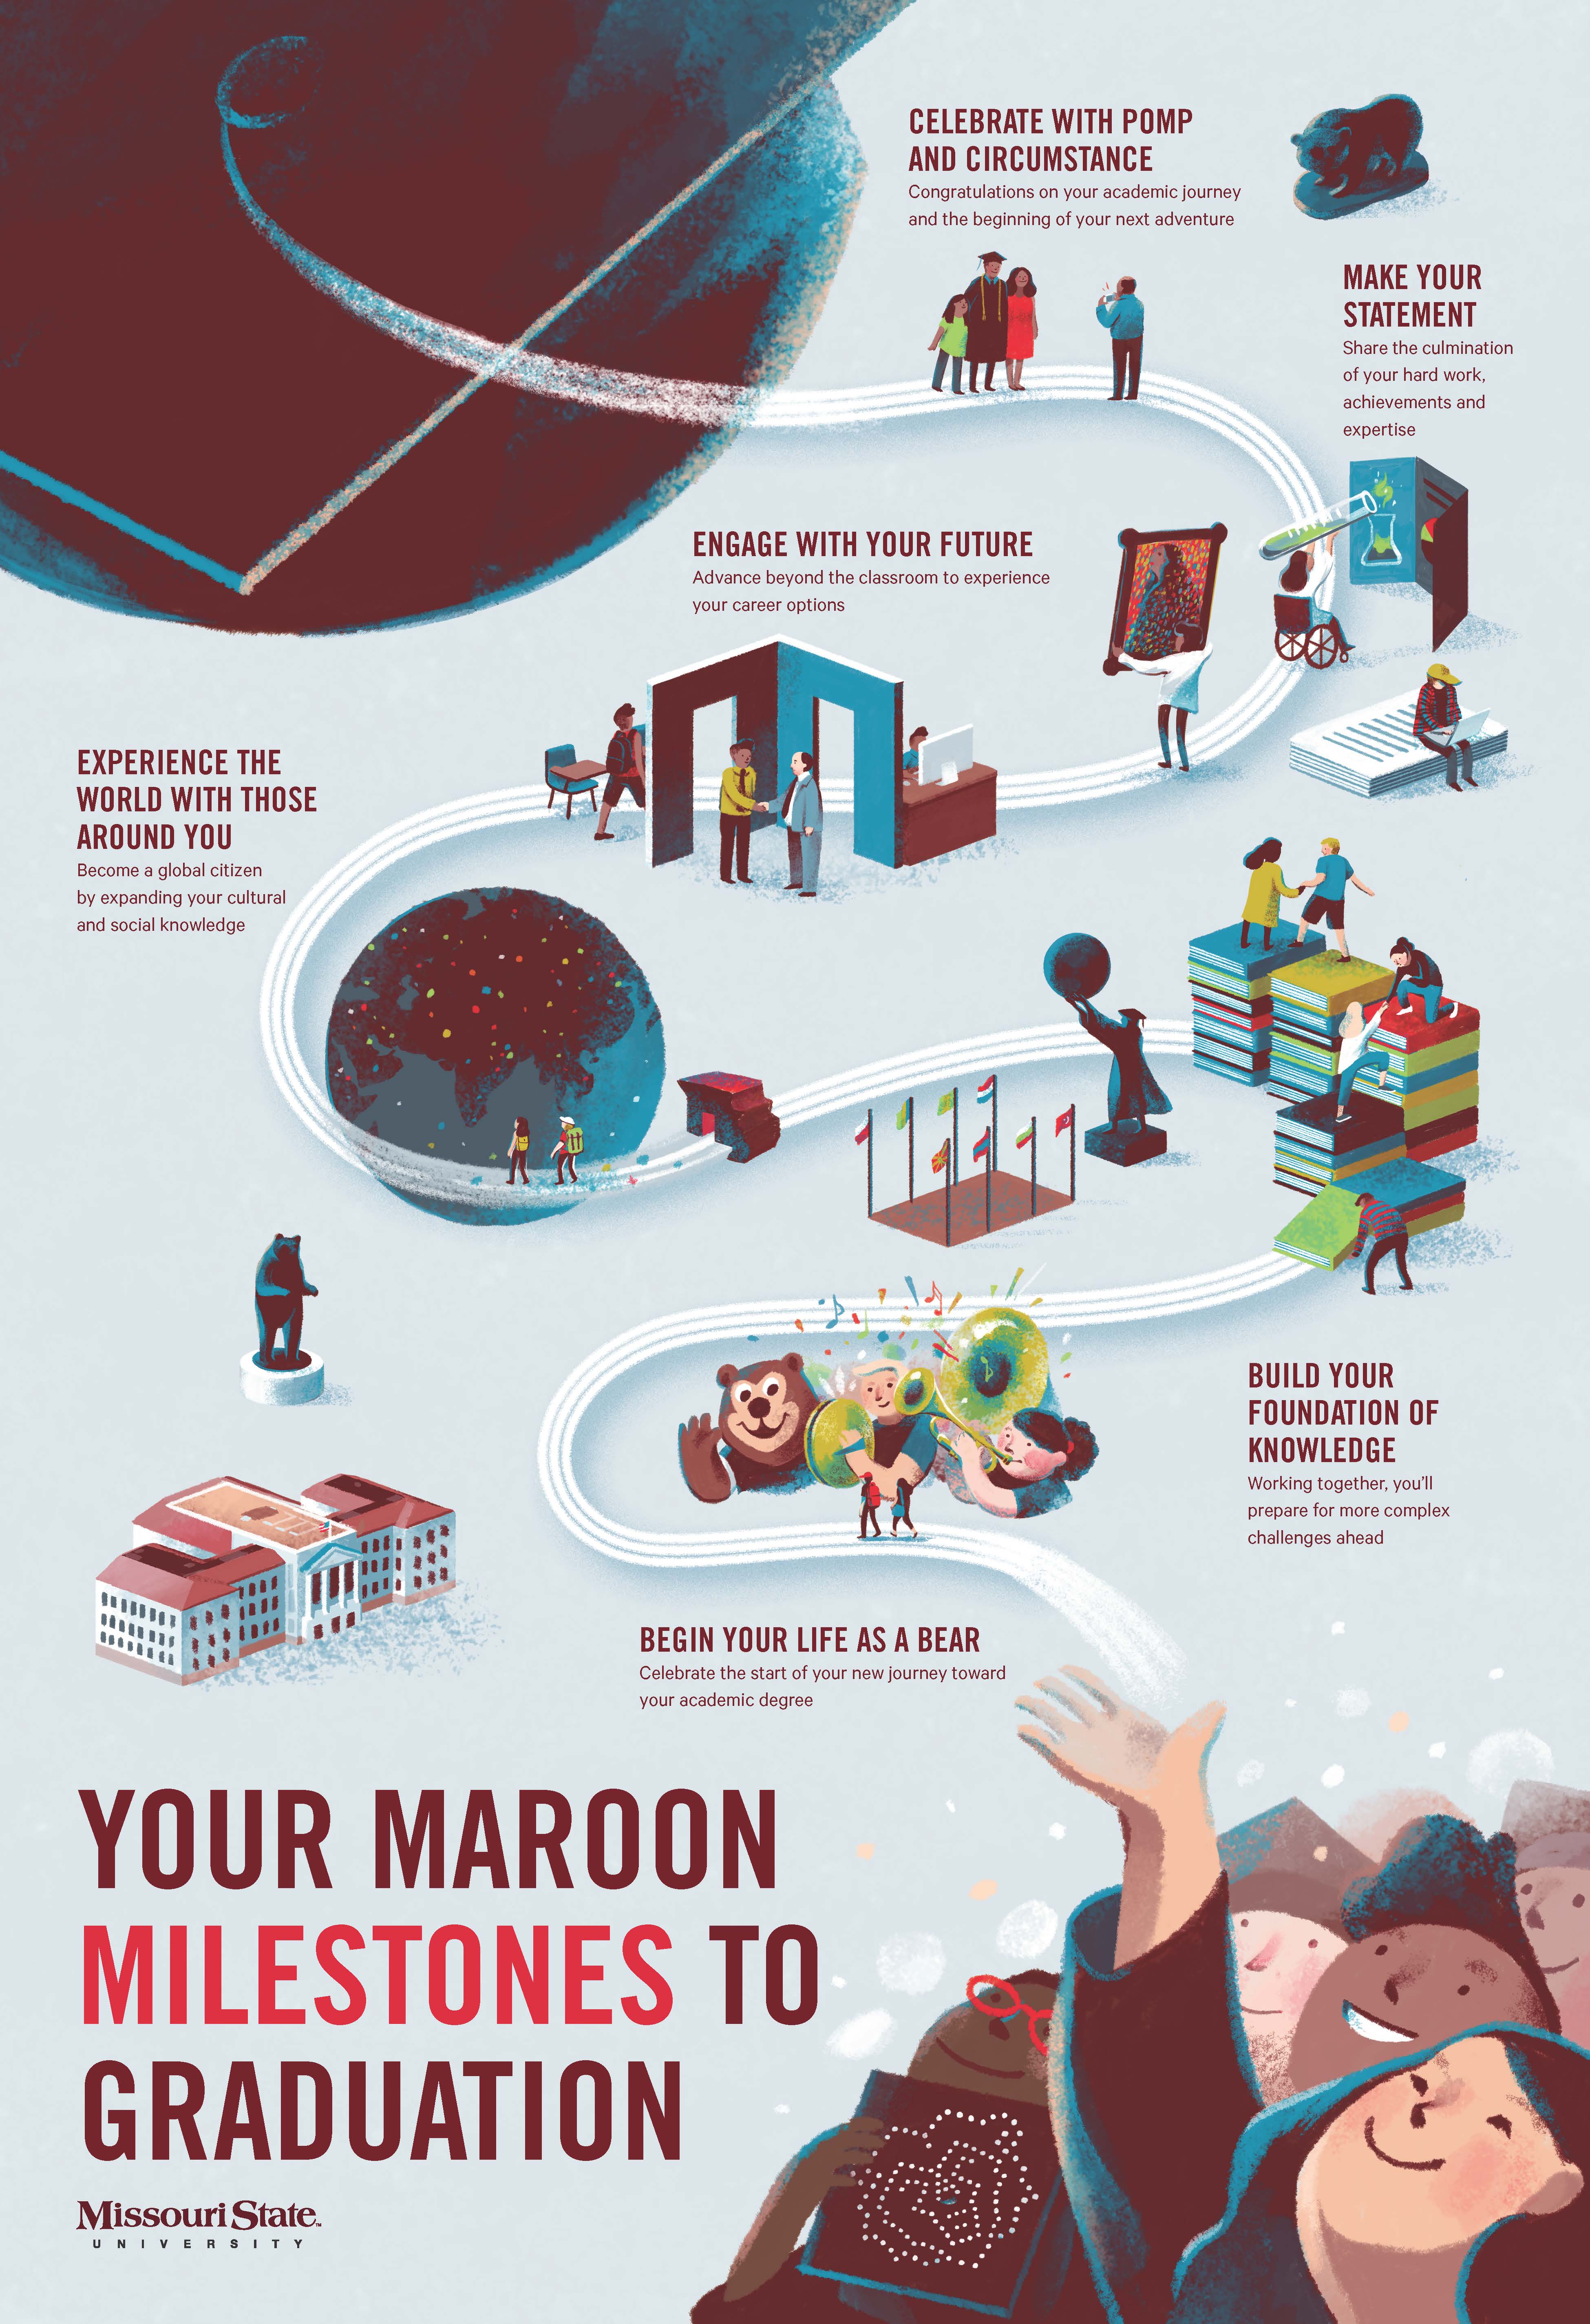 There are six maroon milestones you’ll encounter on your journey from starting at MSU to graduation.